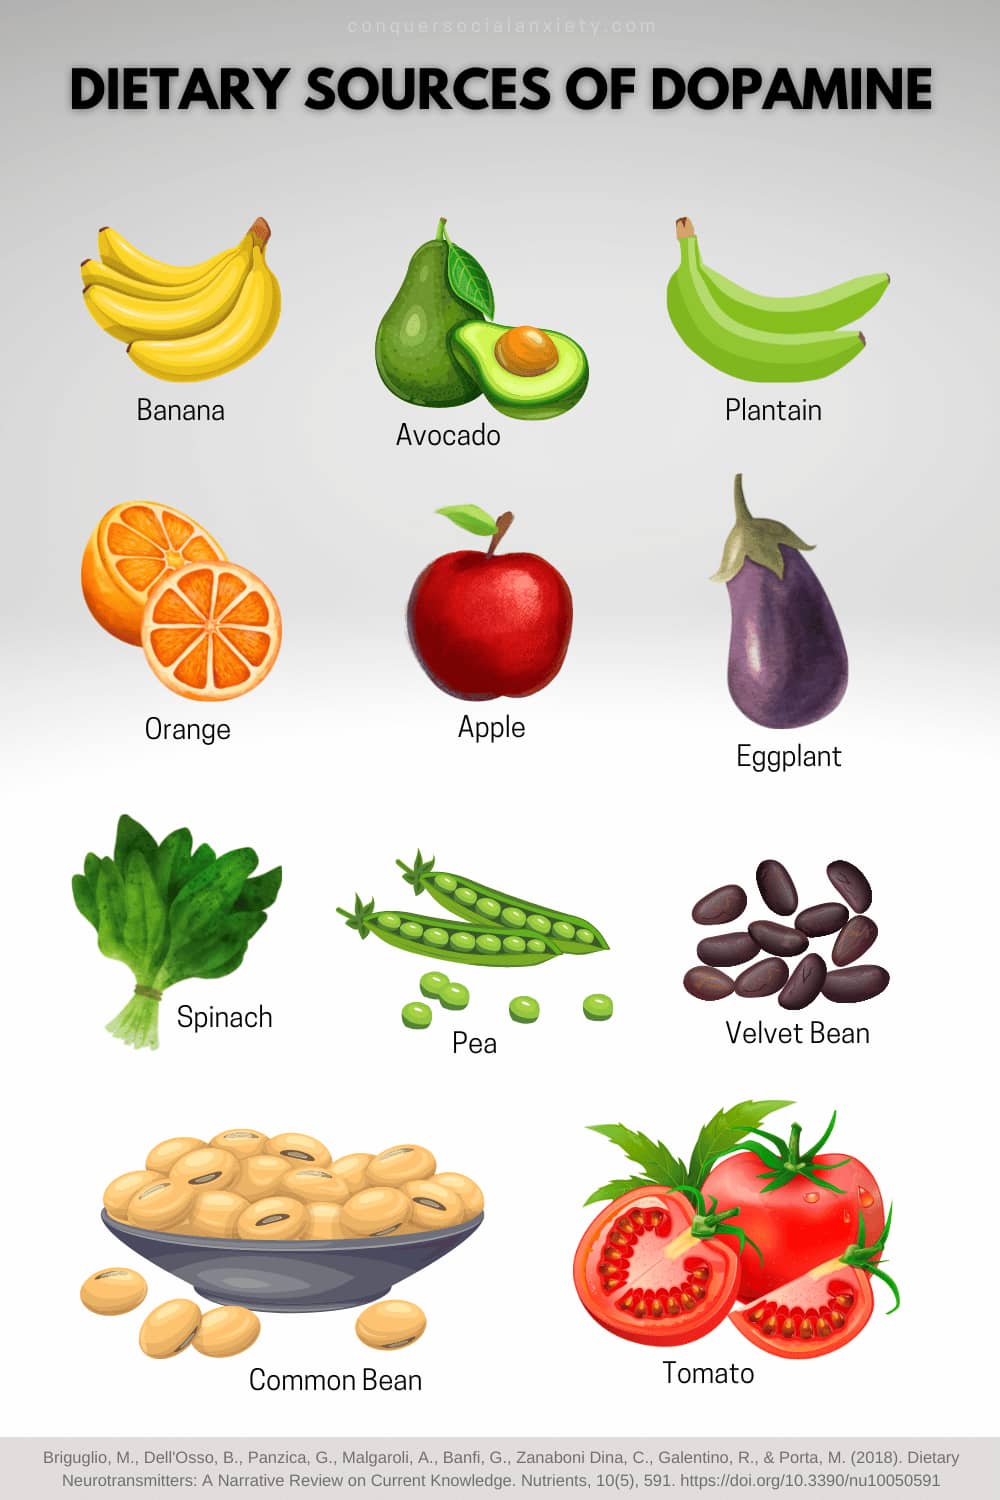 This graphic visually summarized the different foods that contain dopamine.